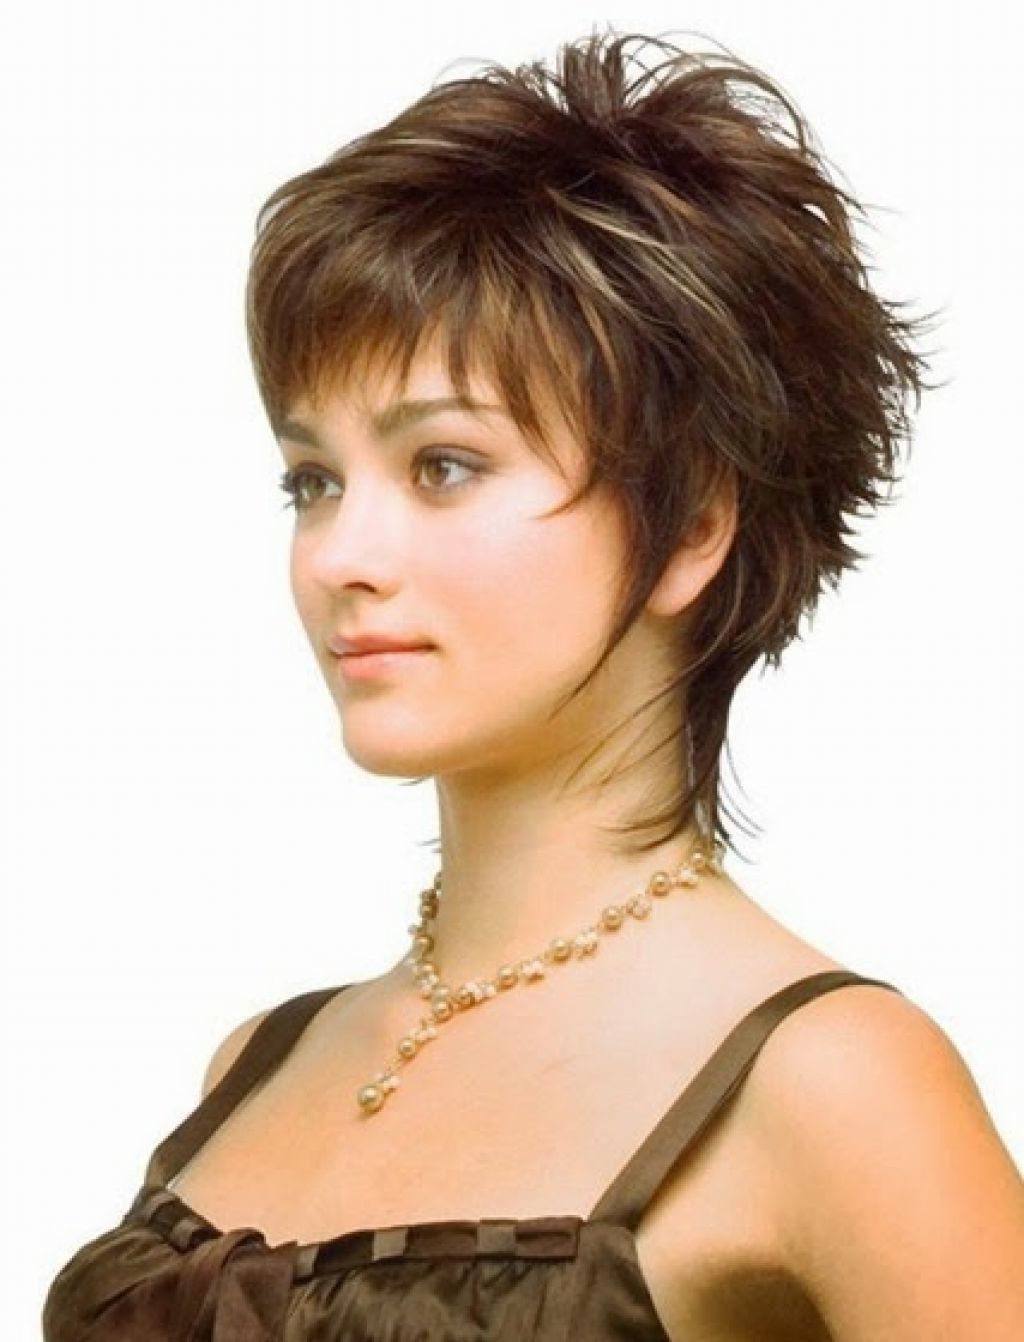 Hairstyles, Short Hairstyles For Fine Hair Fat Face Short Hairstyle With Short Haircuts For Fine Hair And Square Face (View 3 of 25)